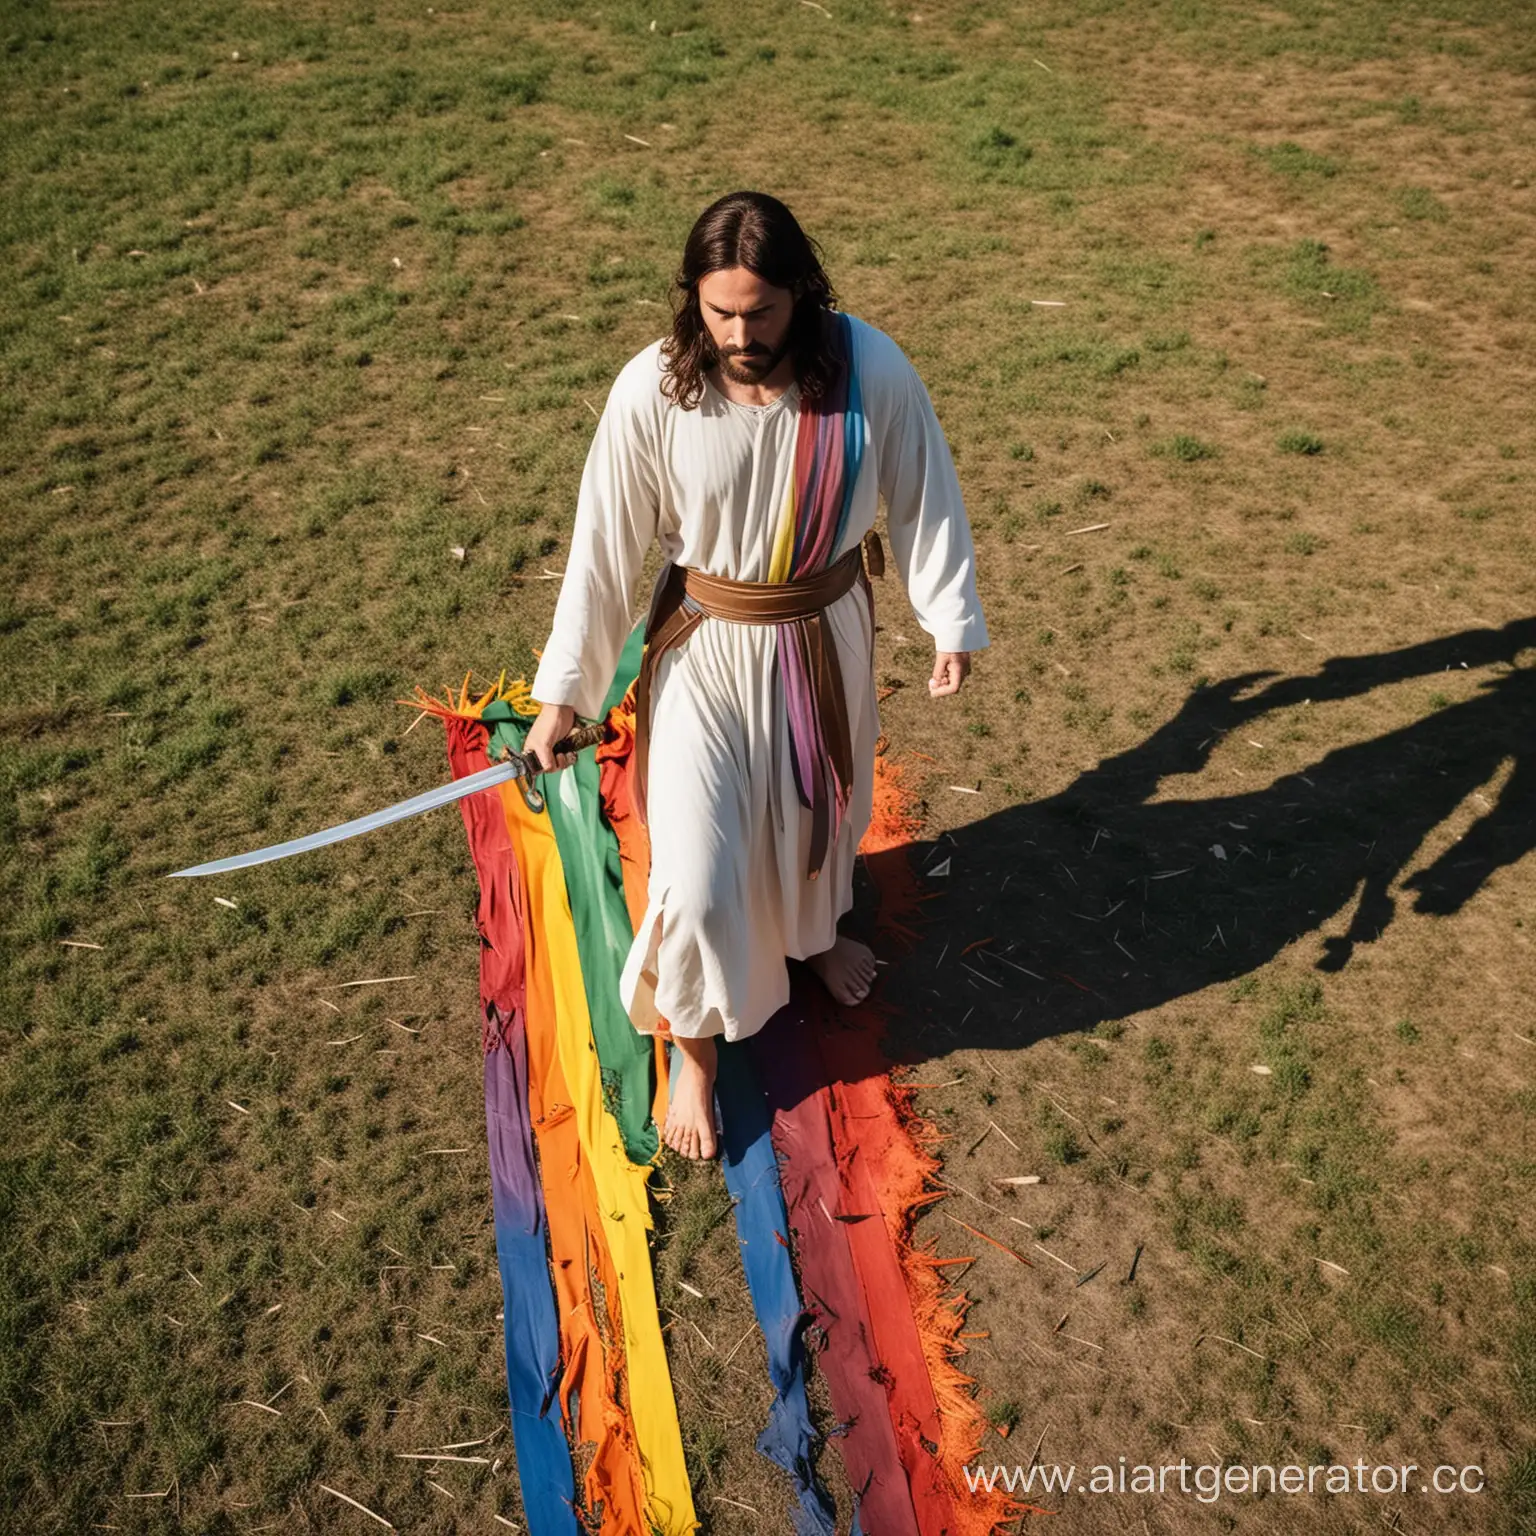 jesus christ using sword to cut down, slashing through and destroying a shredded rainbow flag. sword is cutting through the rainbow flag. He is NOT wearing the flag. flag on ground, actively cutting slicing the flag


 